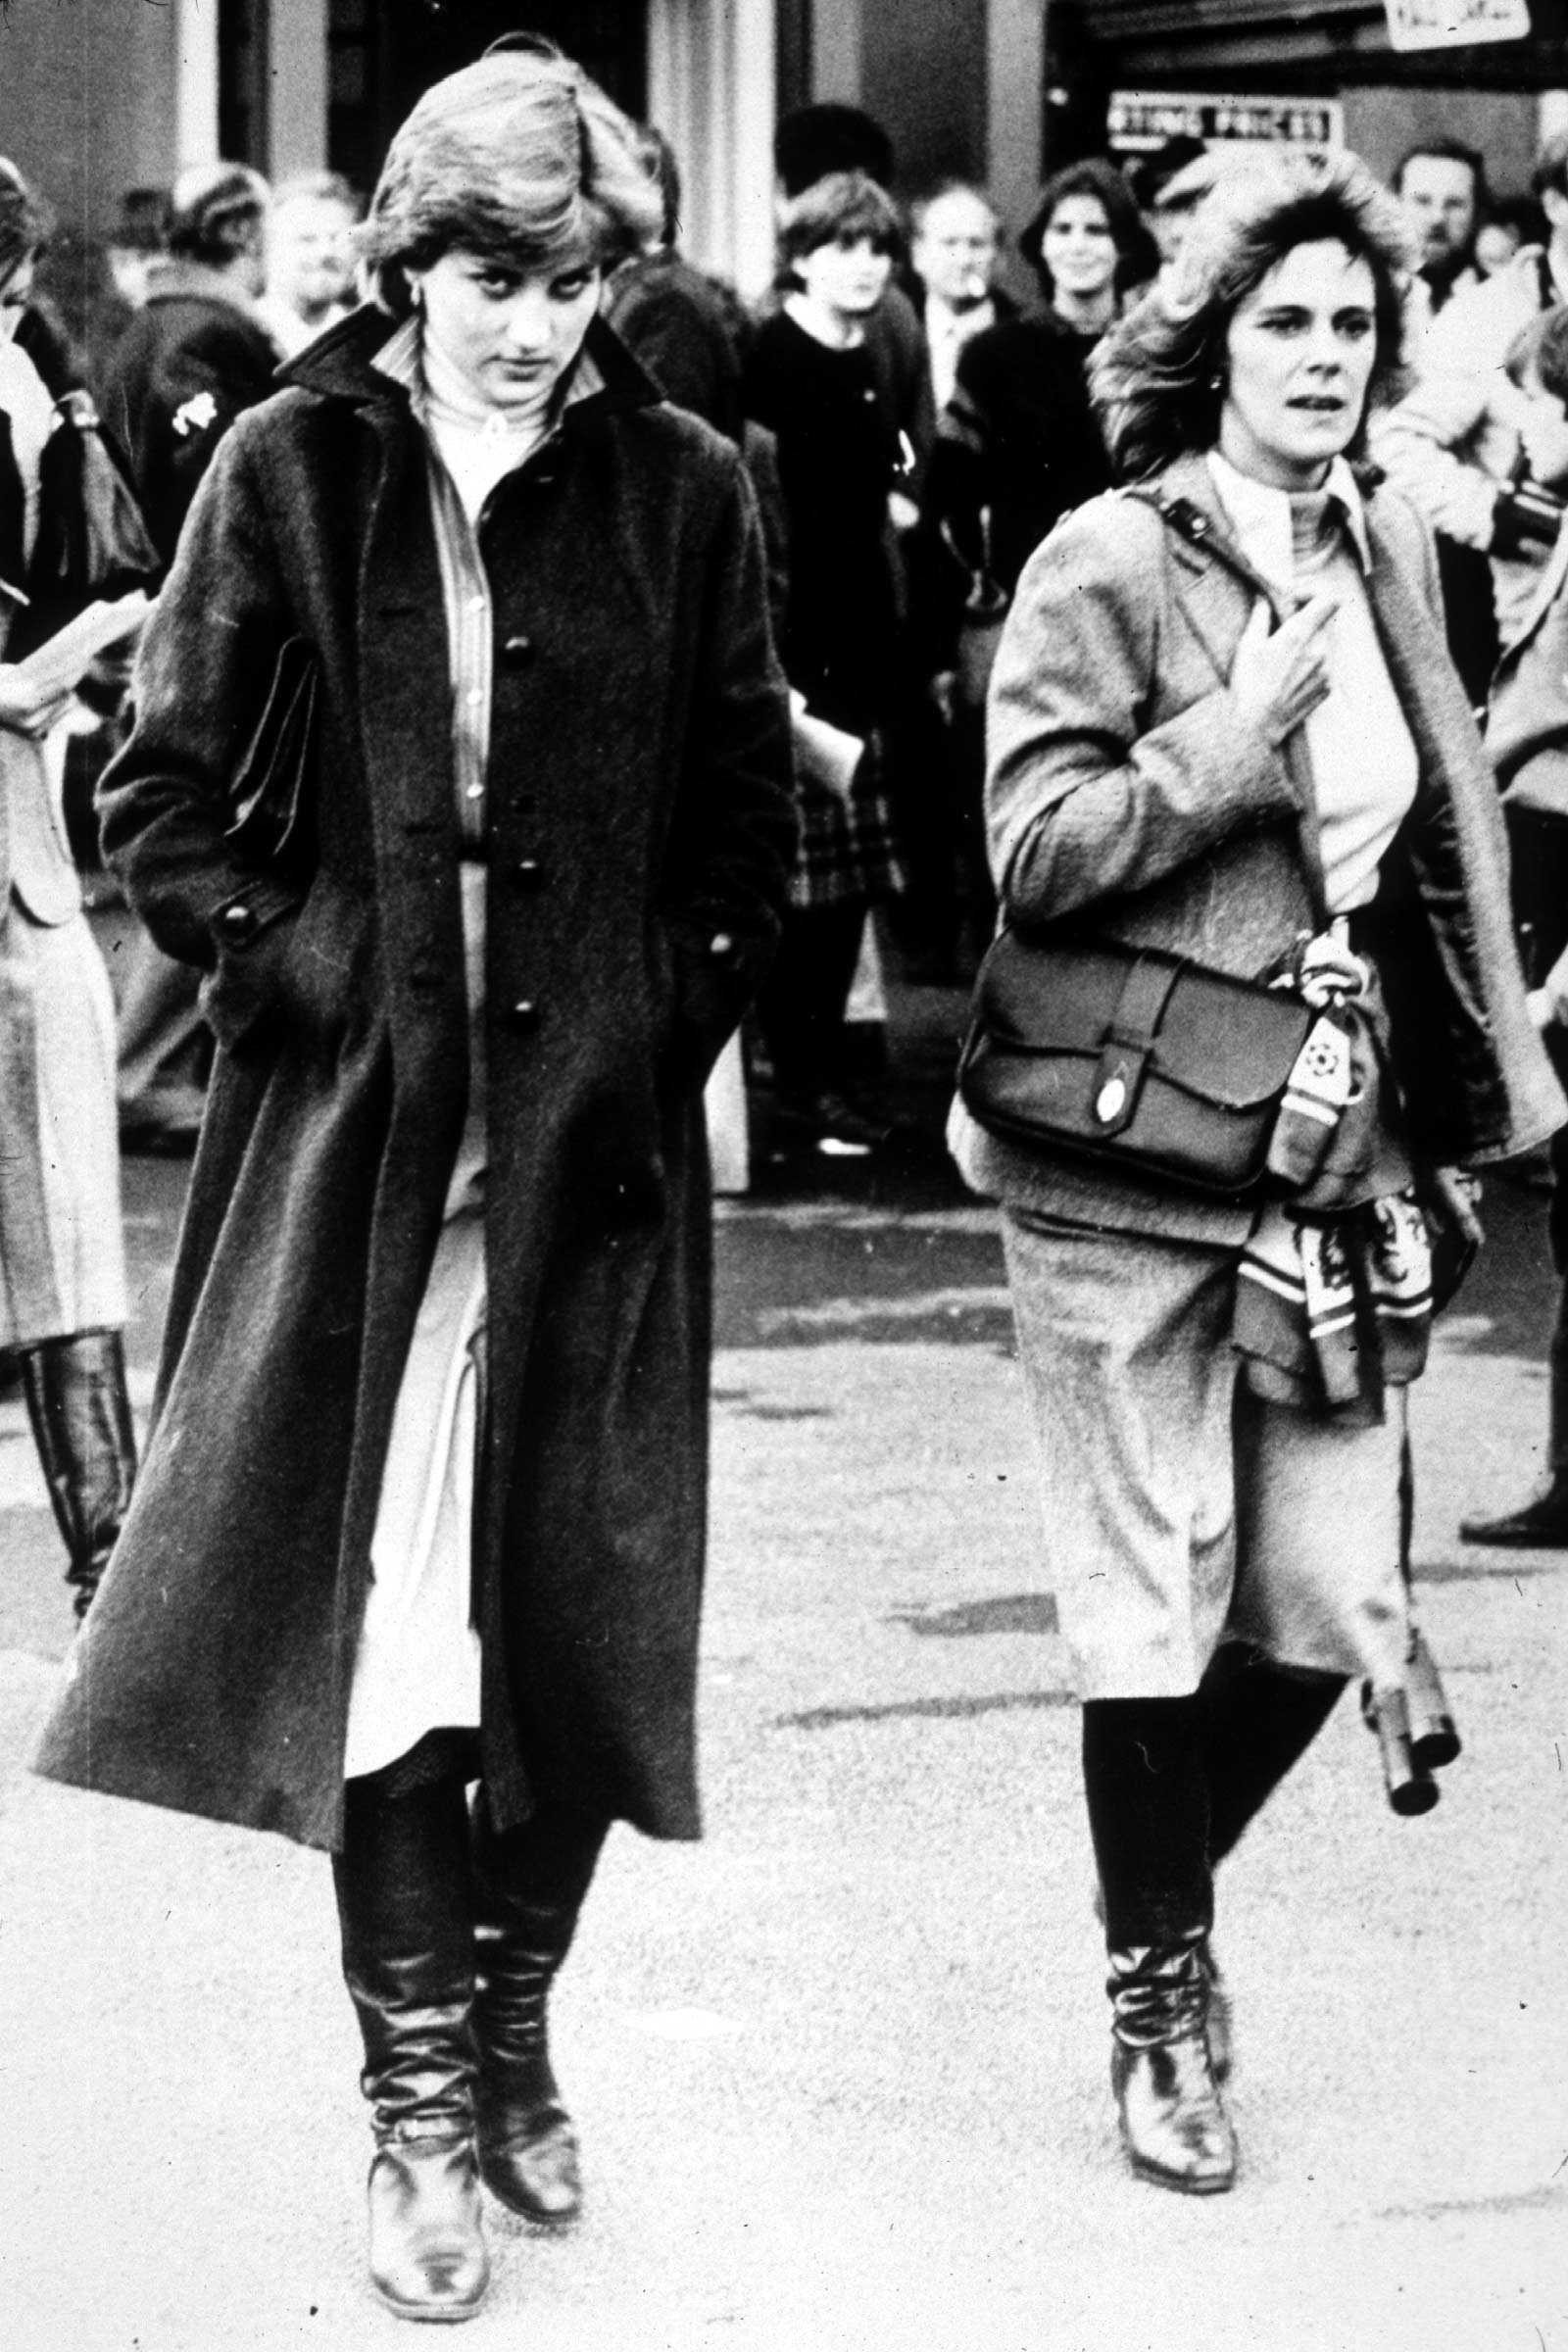 Lady Diana Spencer and Camilla Parker-Bowles at Ludlow Races in 1980.┃Source: Getty Images